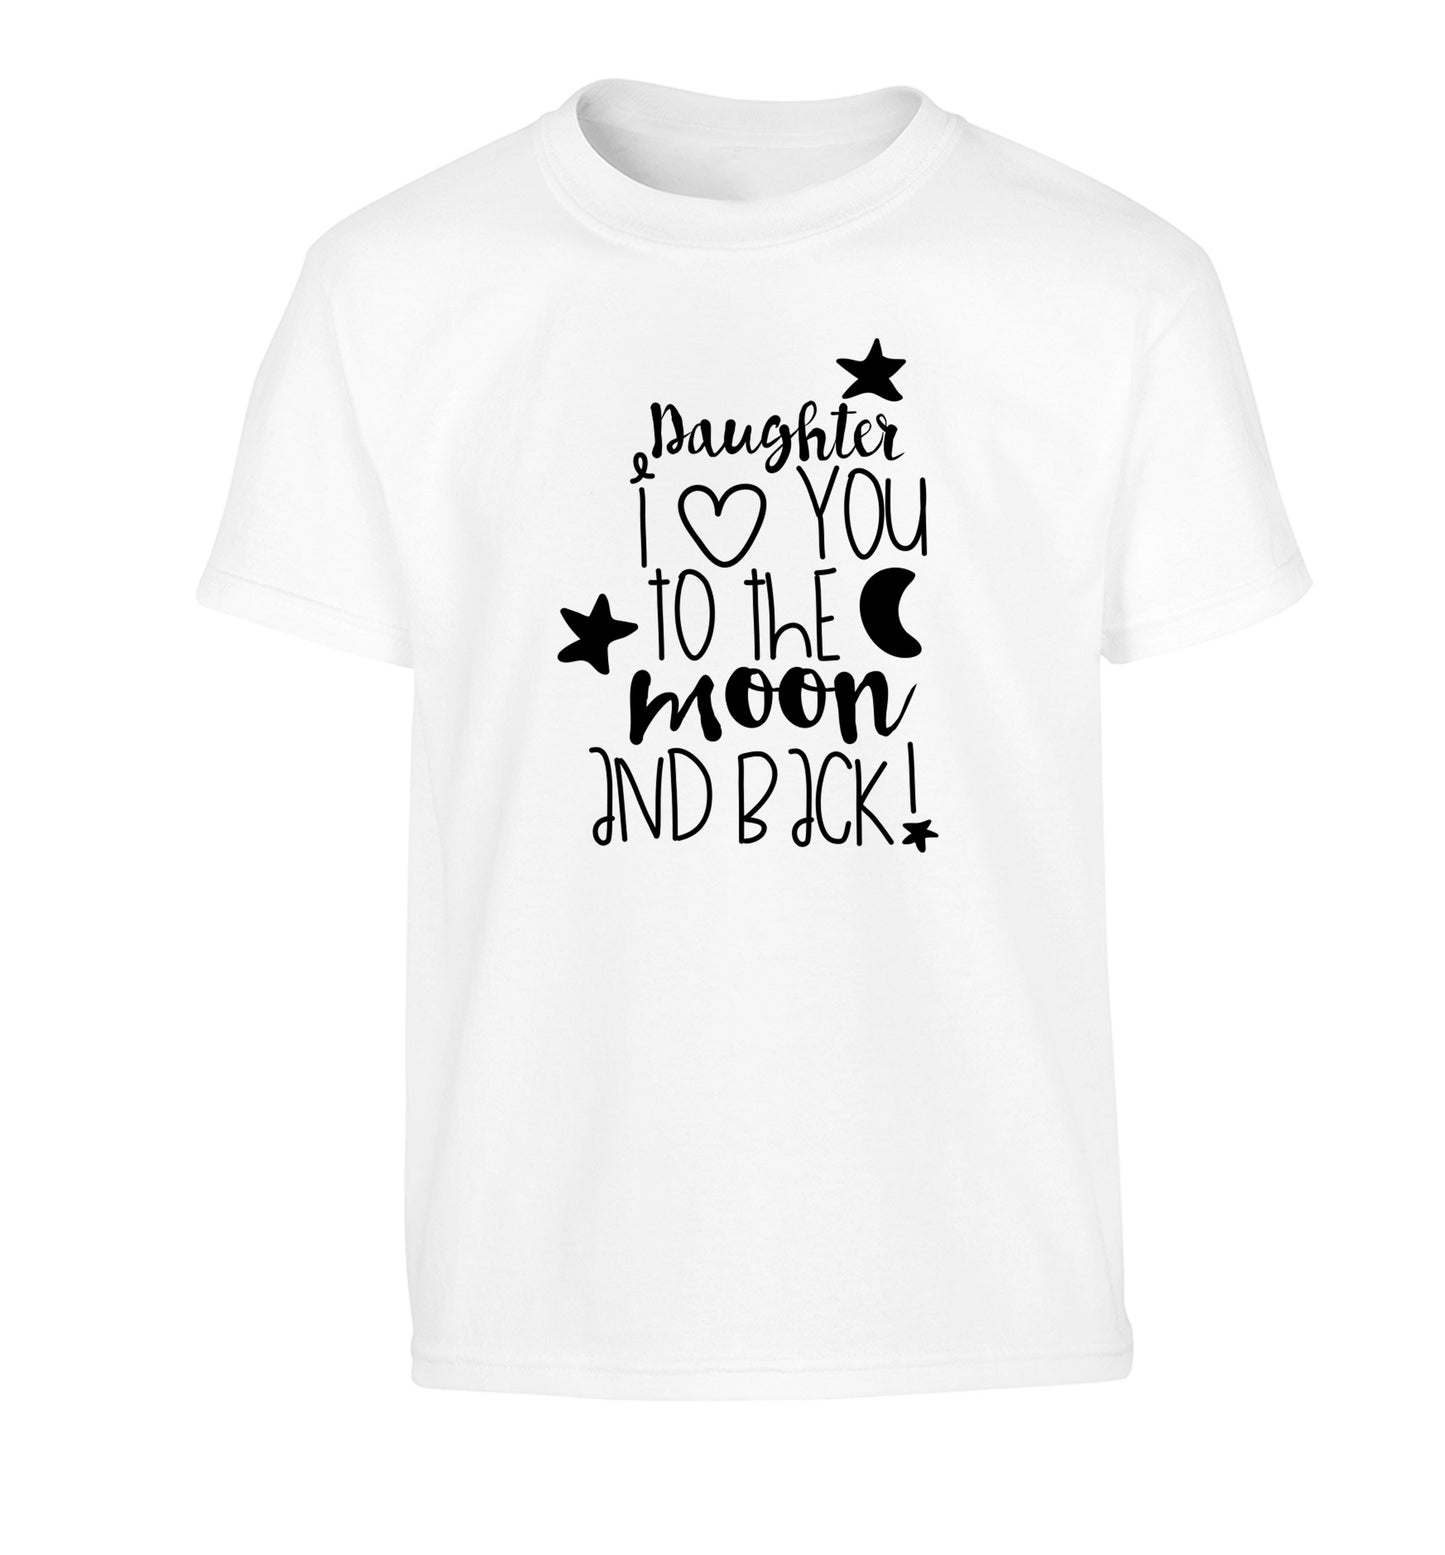 Daughter I love you to the moon and back Children's white Tshirt 12-14 Years